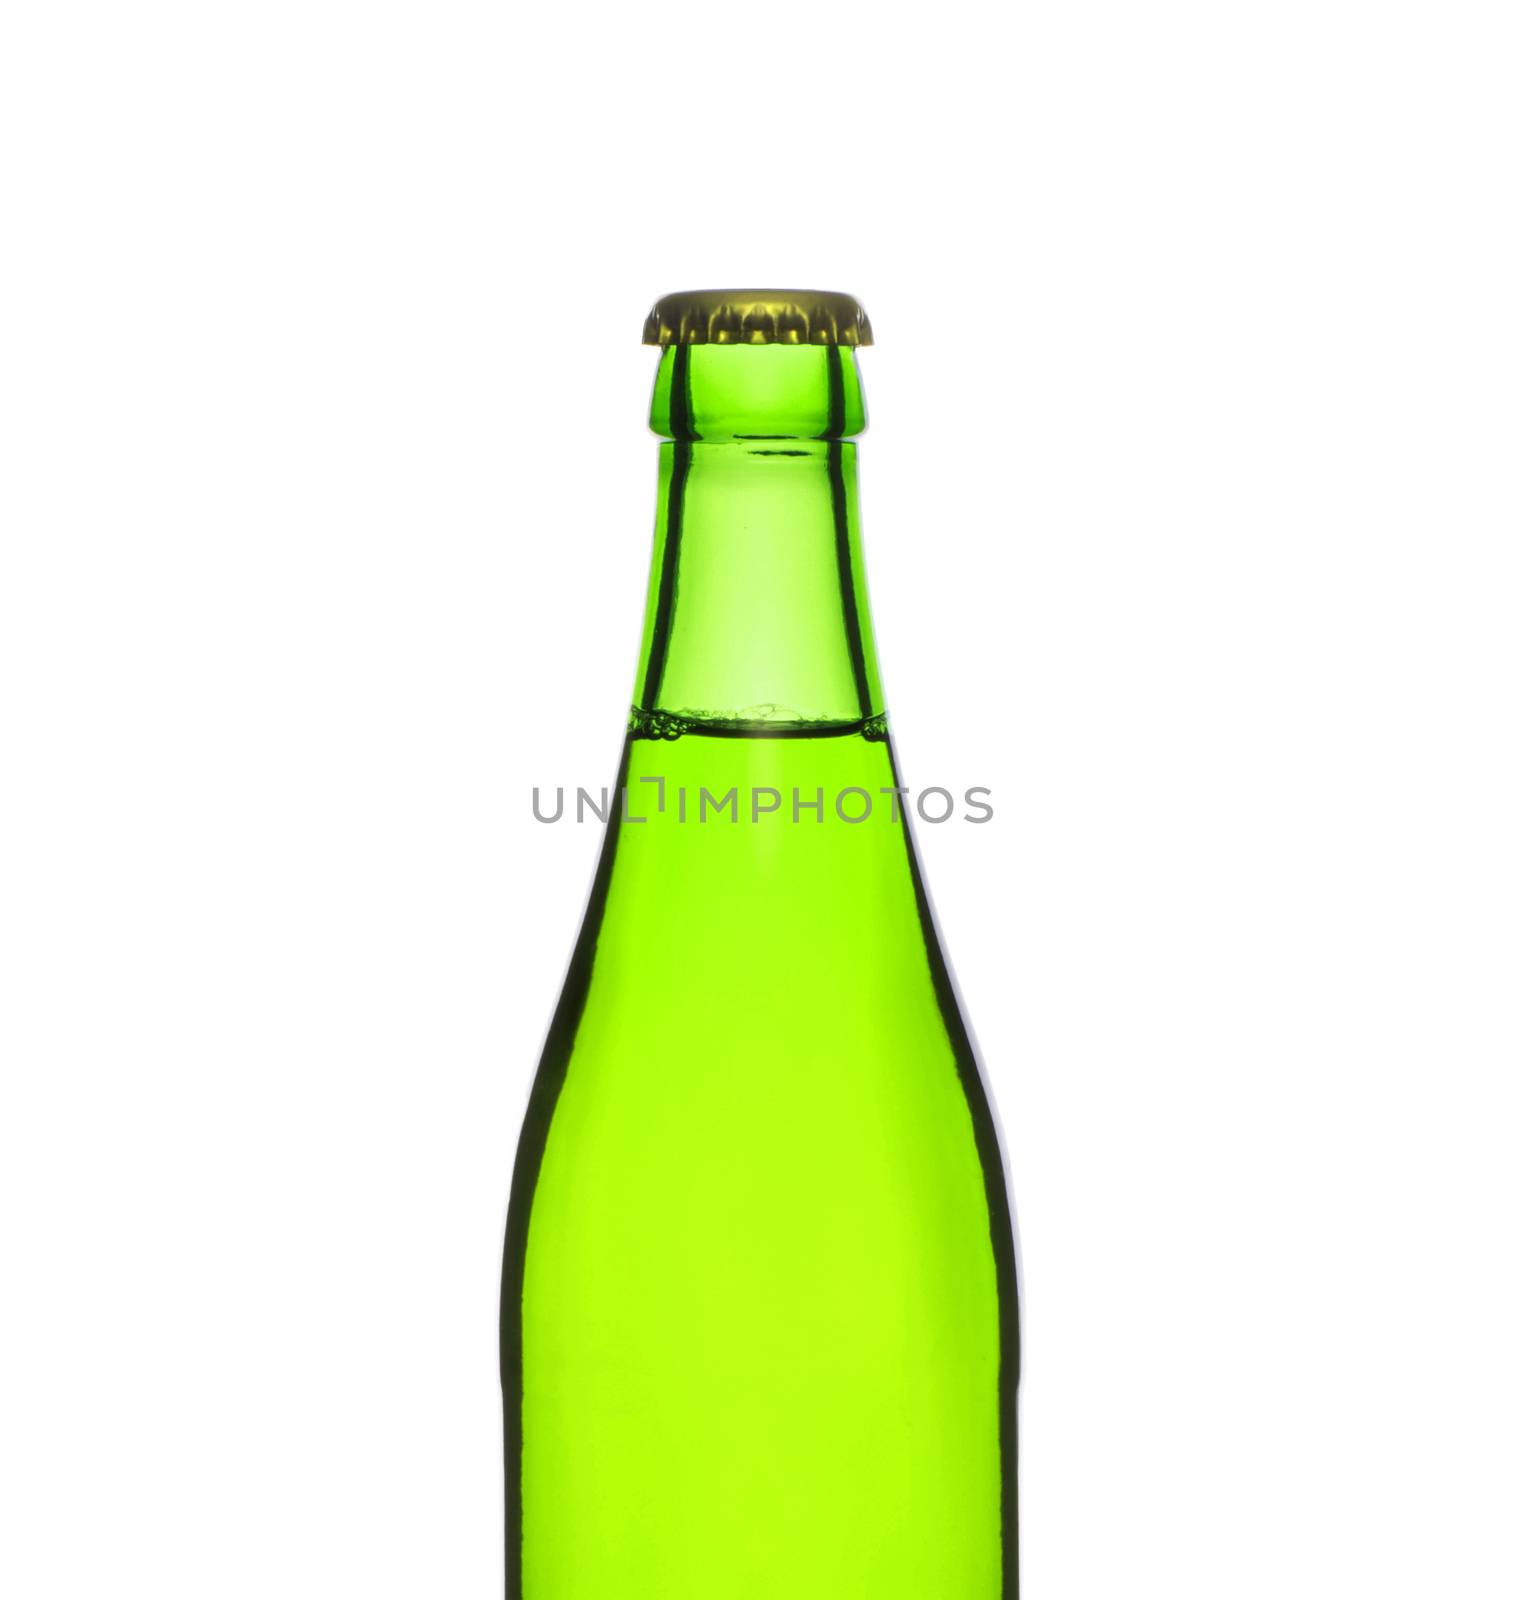 Beer bottle isolated on white background by ozaiachin